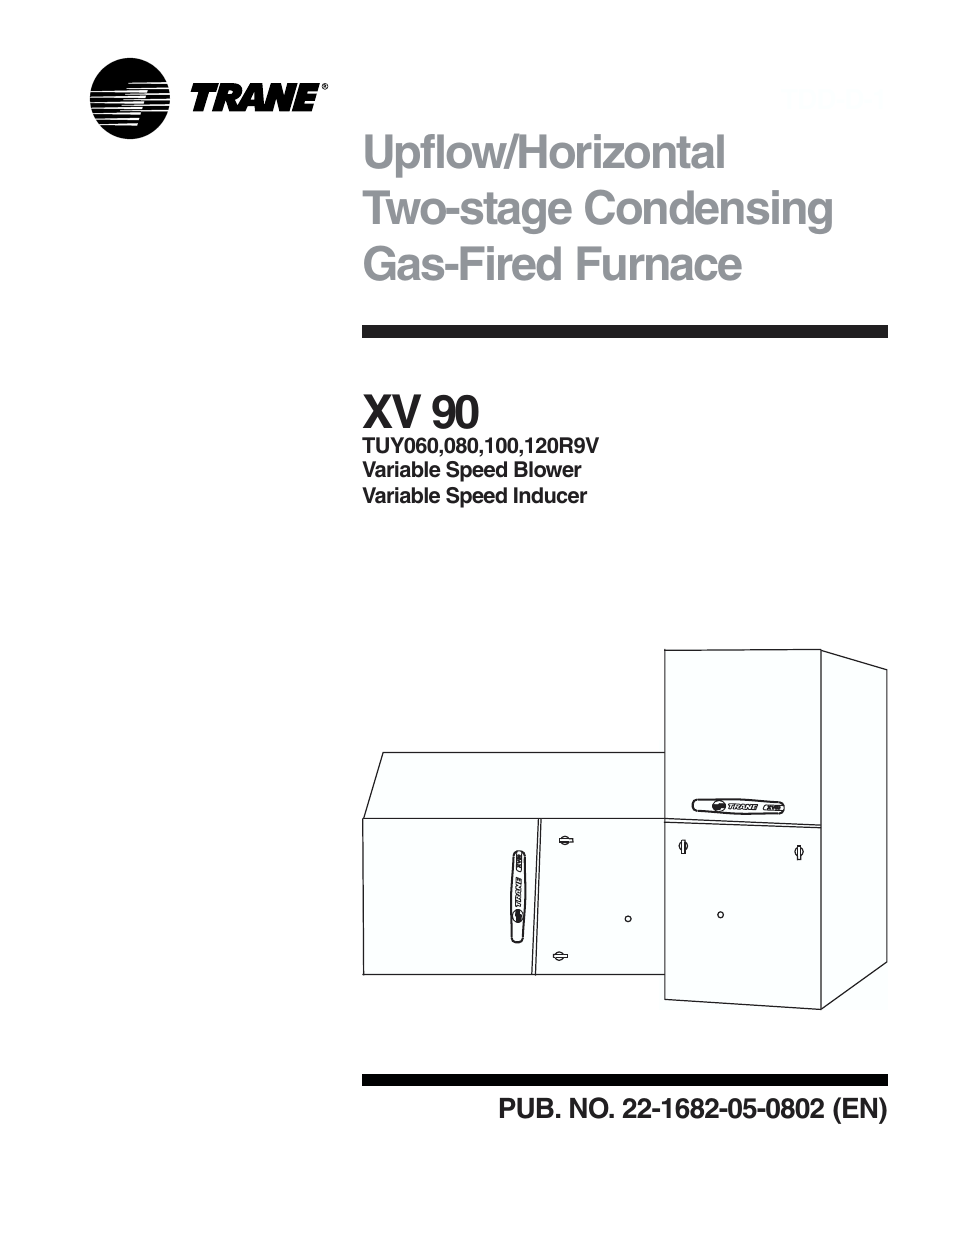 Trane XV 90 User Manual | 16 pages | Also for: 080, 120R9V, 100